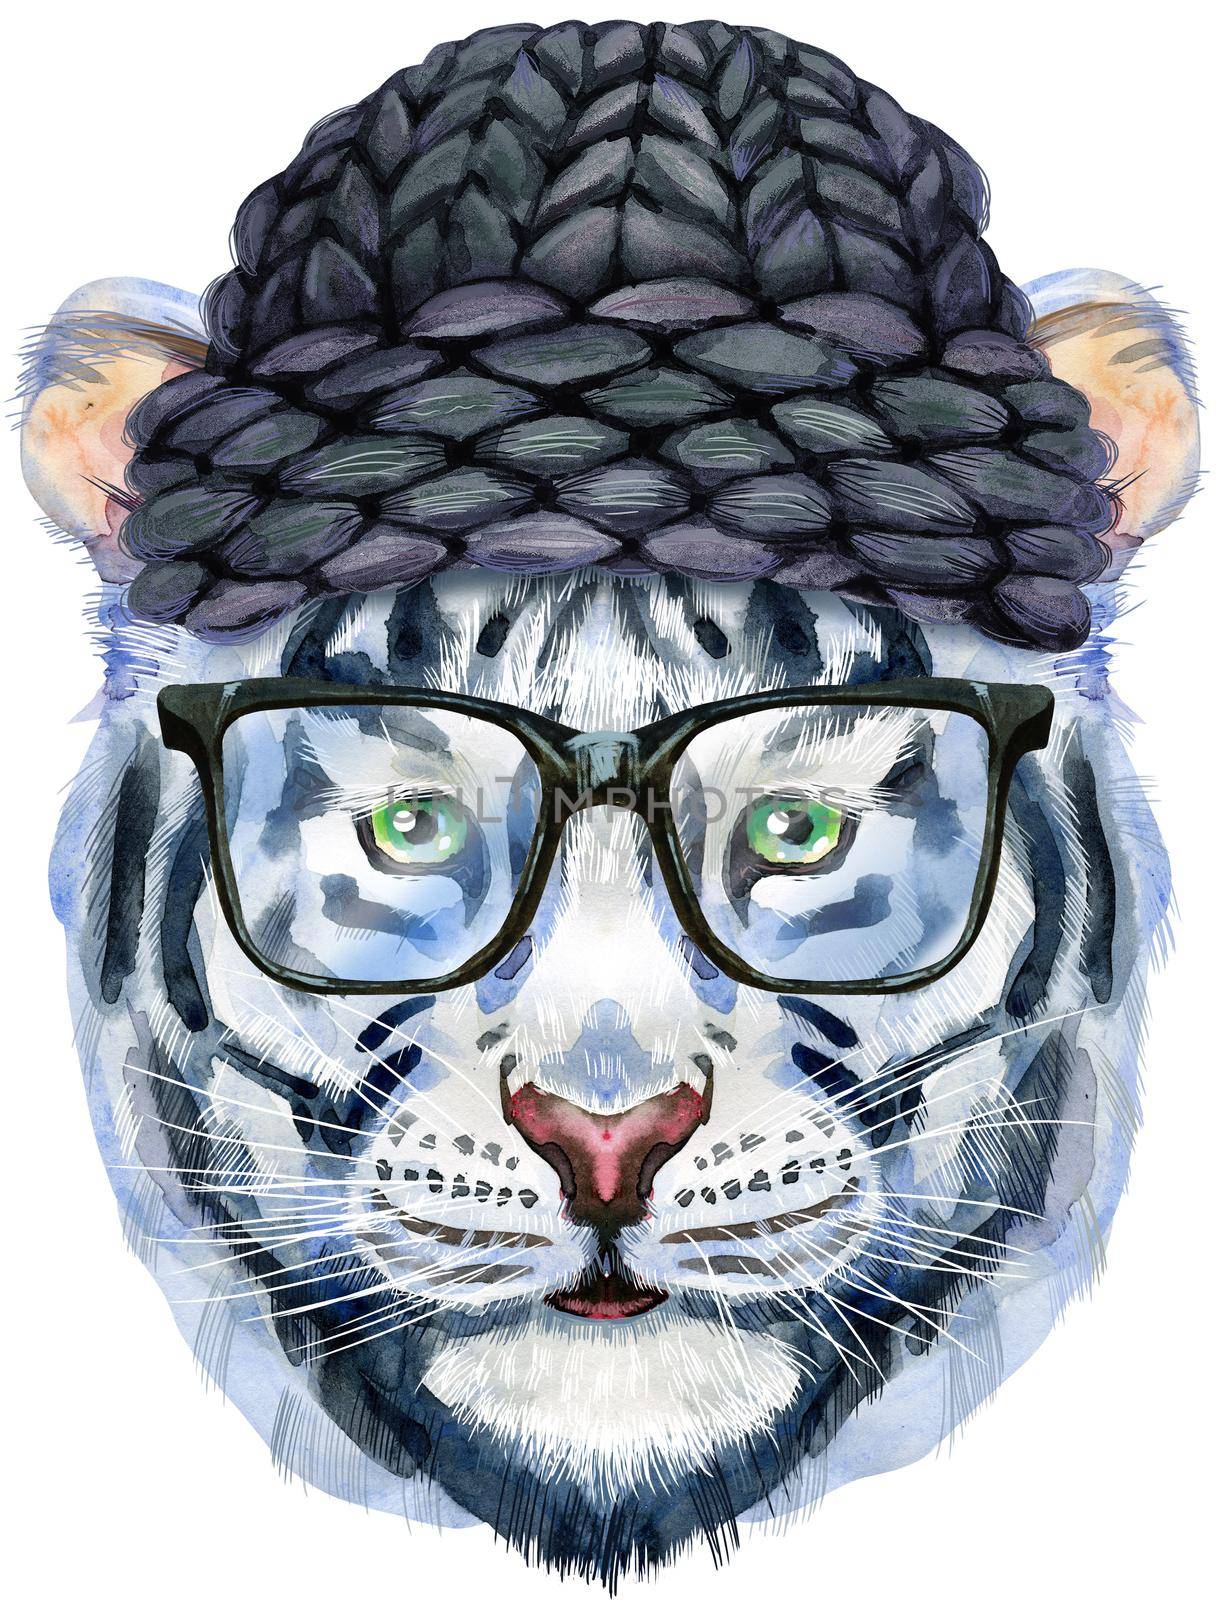 Watercolor illustration of white smiling tiger in a knitted black hat and glasses